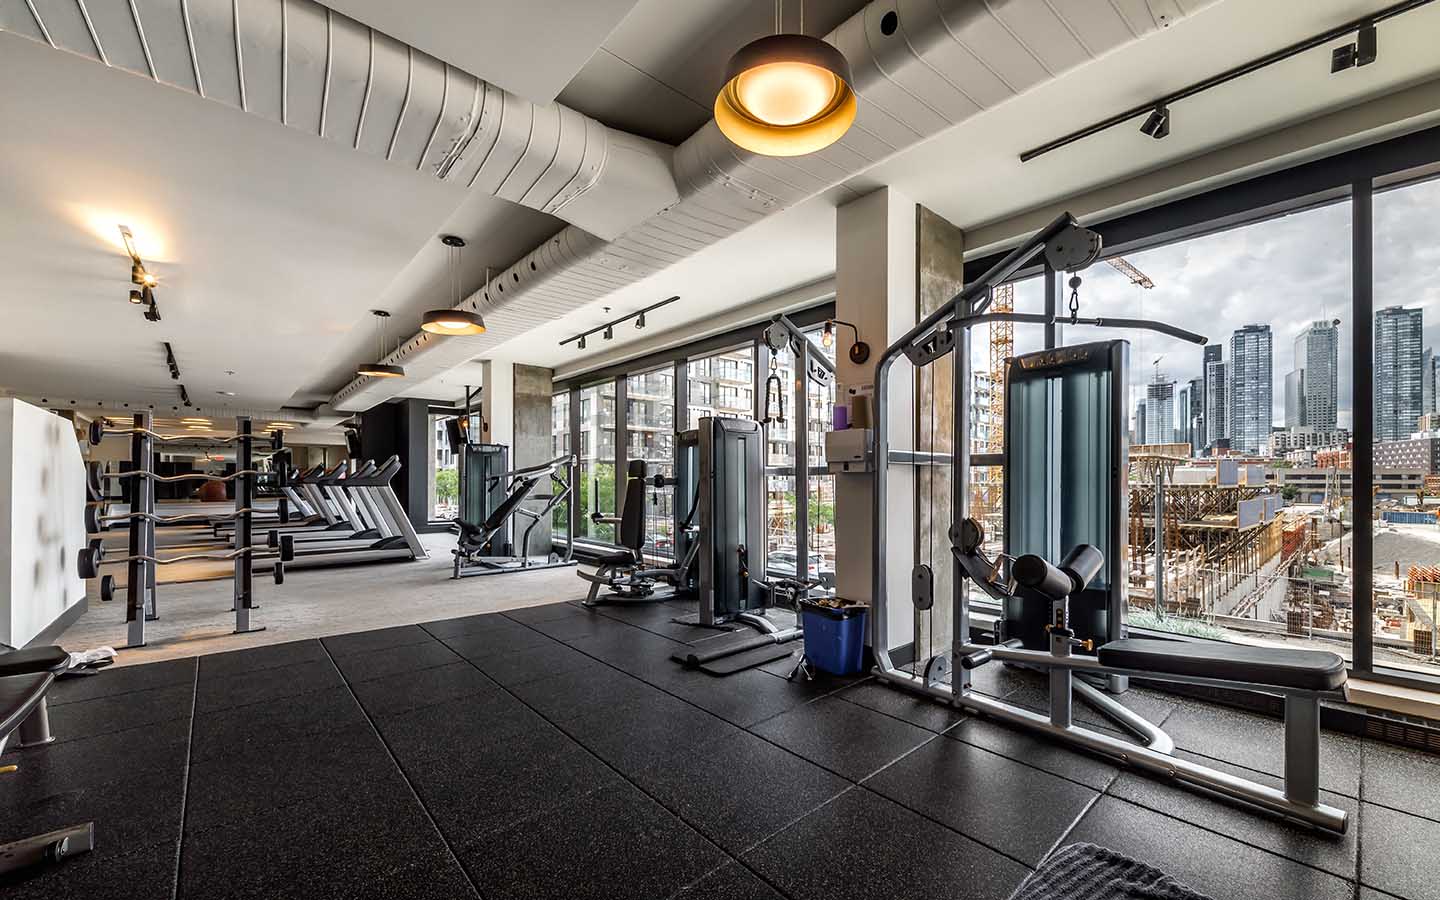 Gyms have designated time slots to avoid overcrowding is a basic etiquette for common areas of apartment complexes